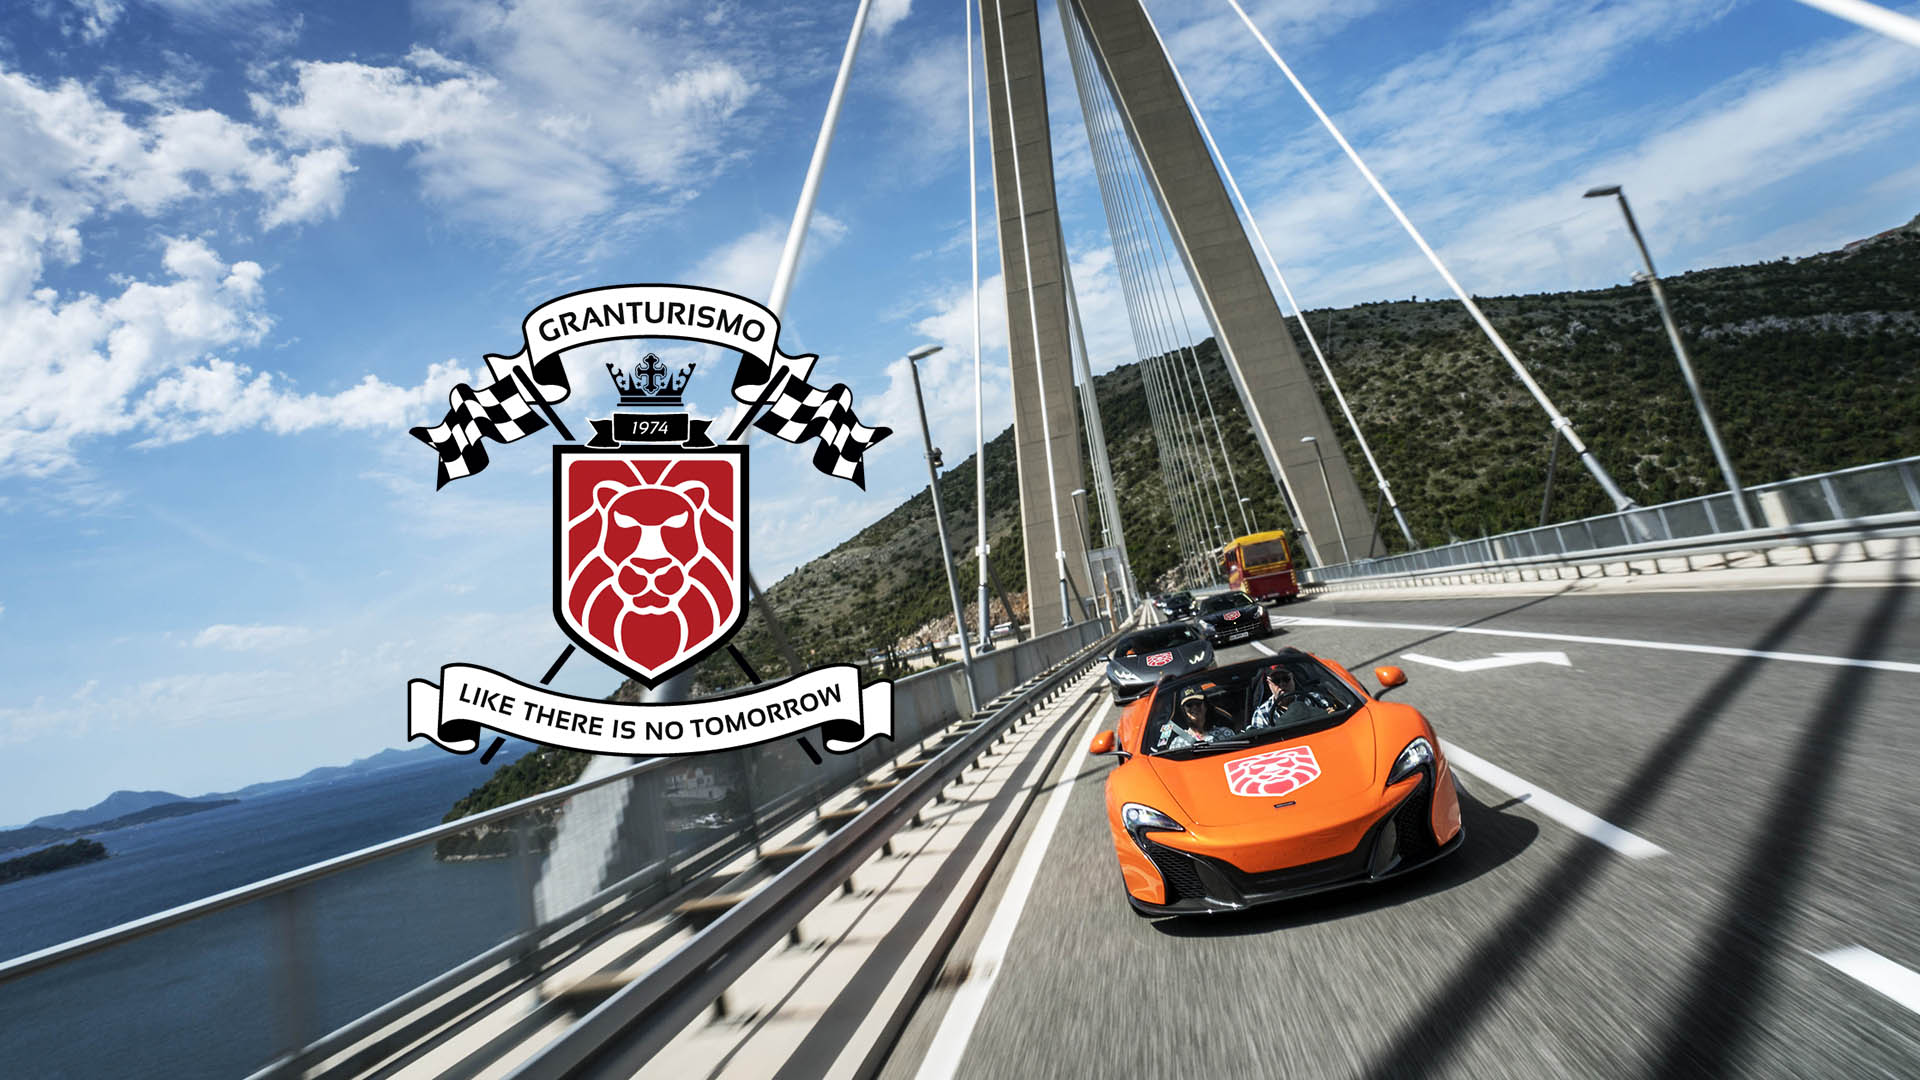 Super luxury cars arrived this year on Stradun, in Dubrovnik, Croatia on  June 9, 2022. Super luxury cars arrived from Mostar as part of the HPlus  Rally, organized by Hifa Petrol. The